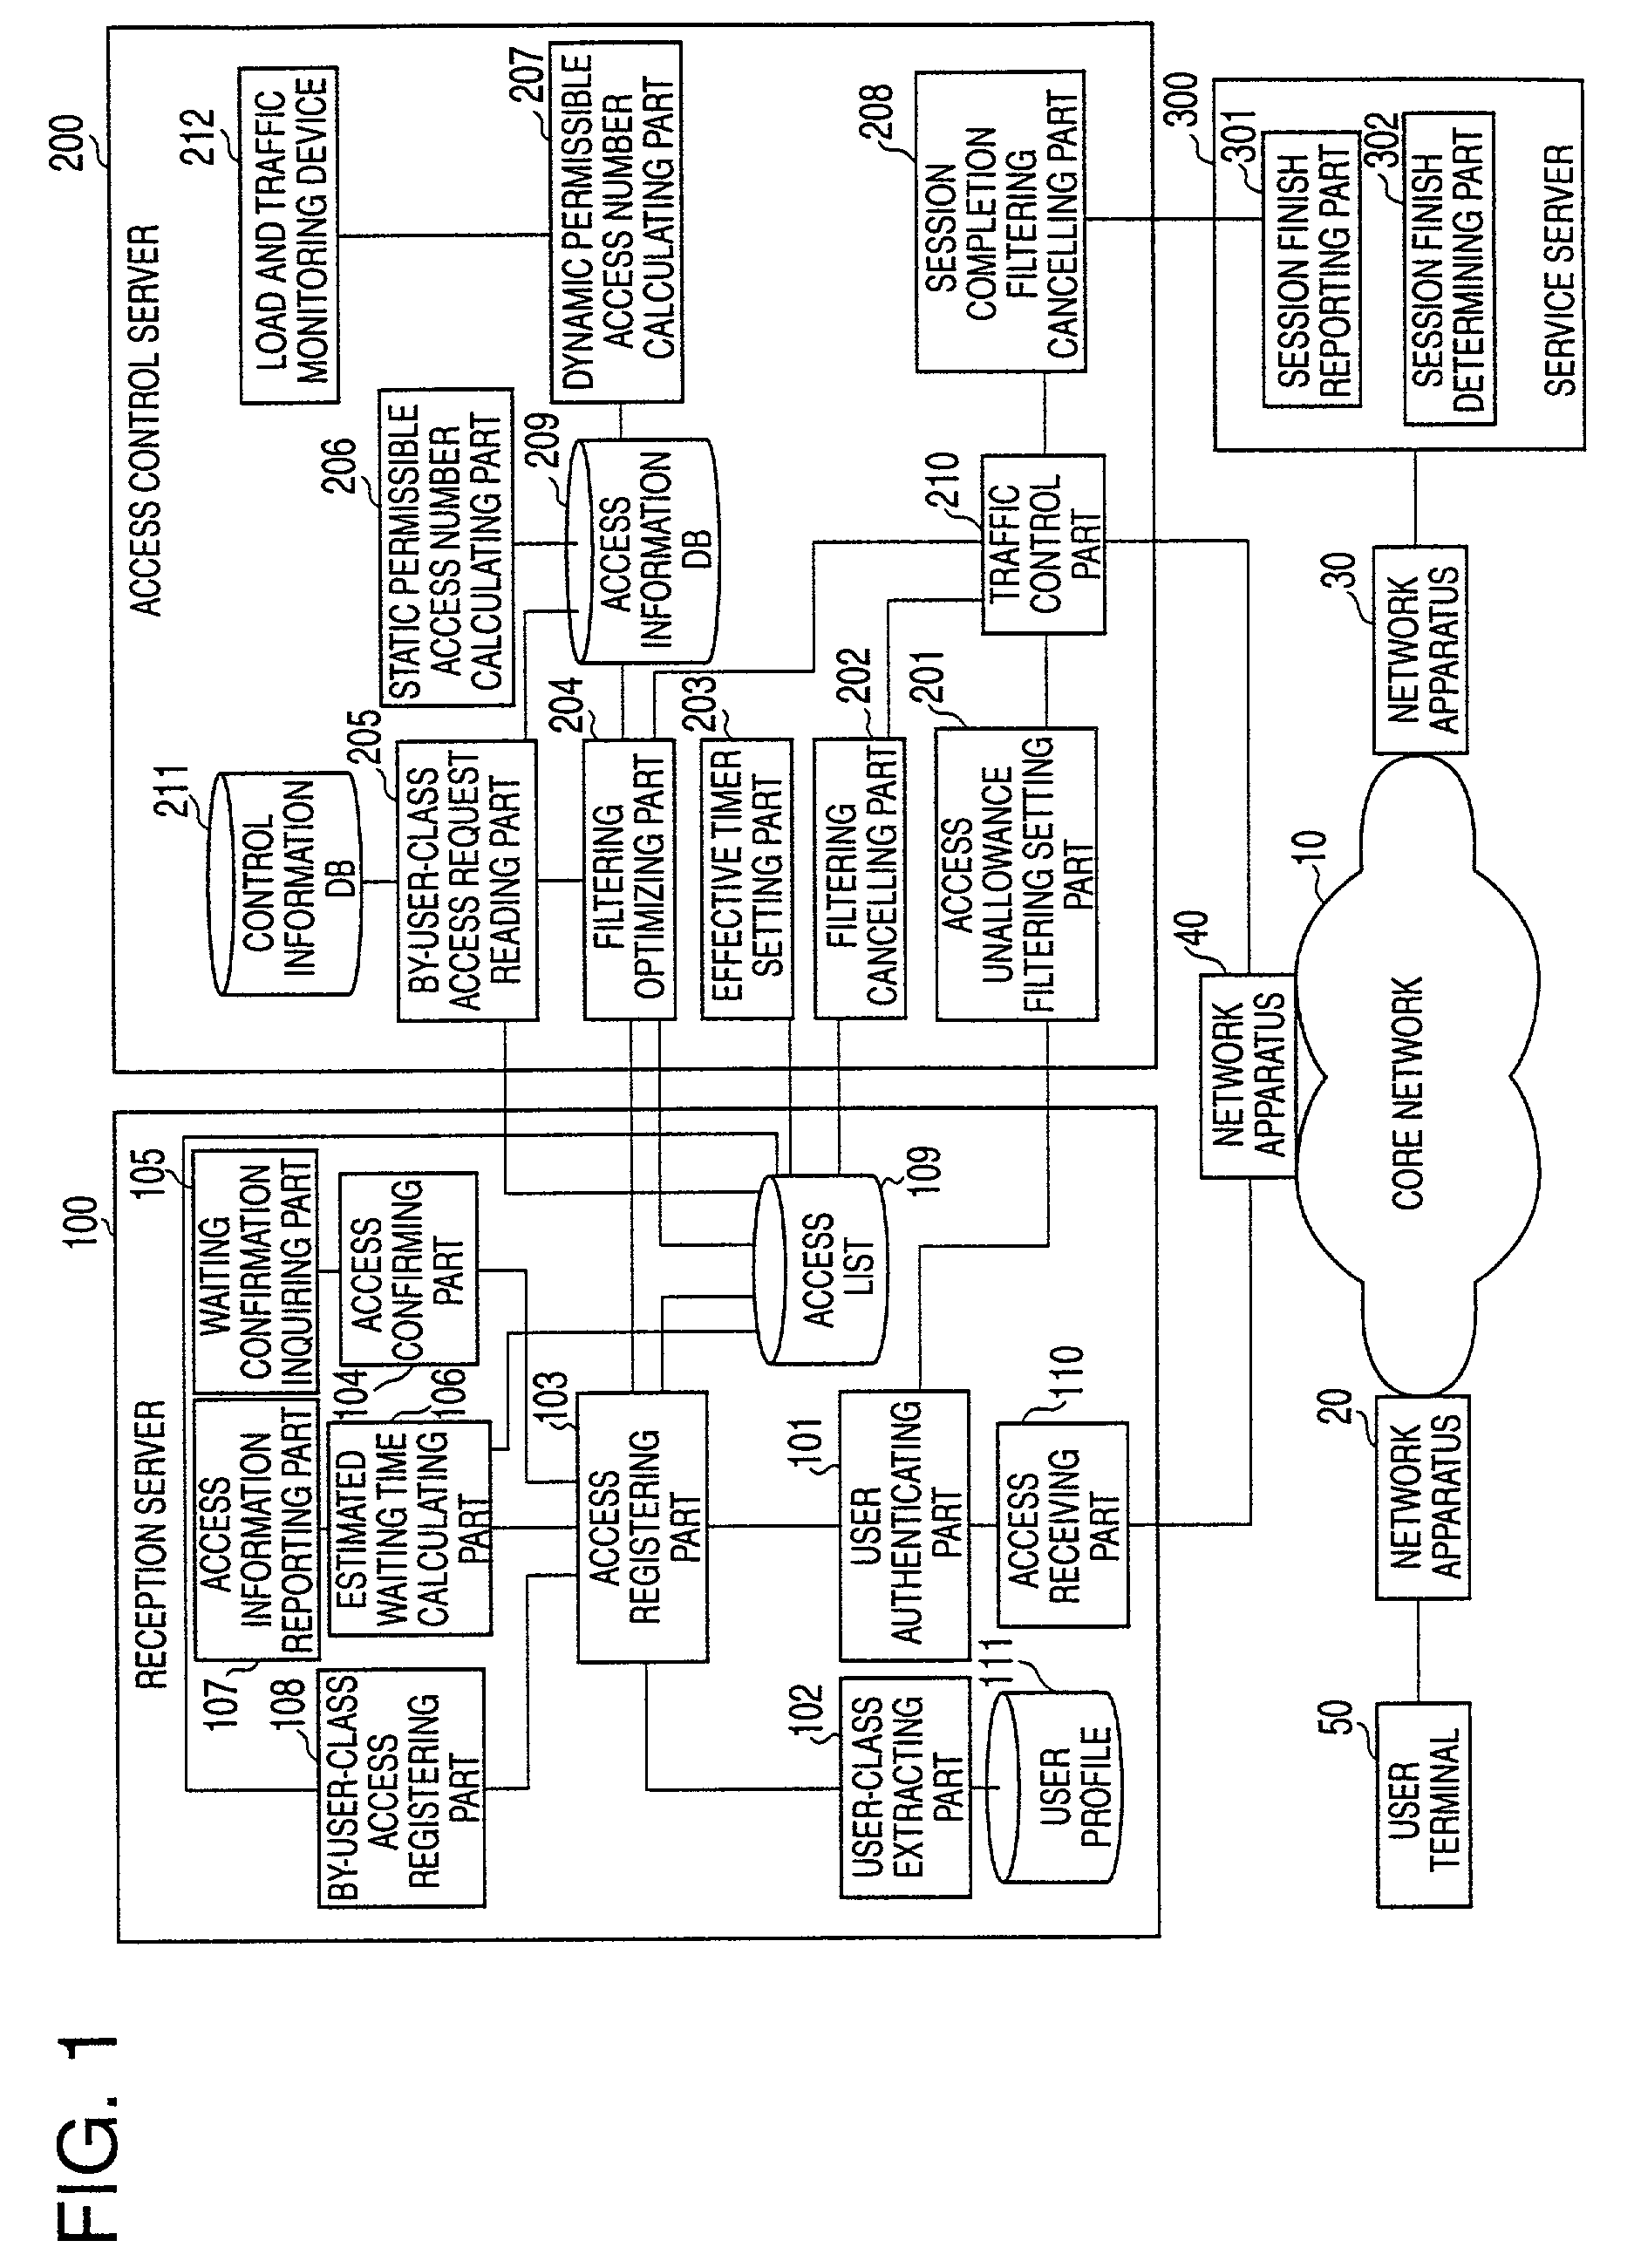 Network access control method, network system using the method and apparatuses configuring the system